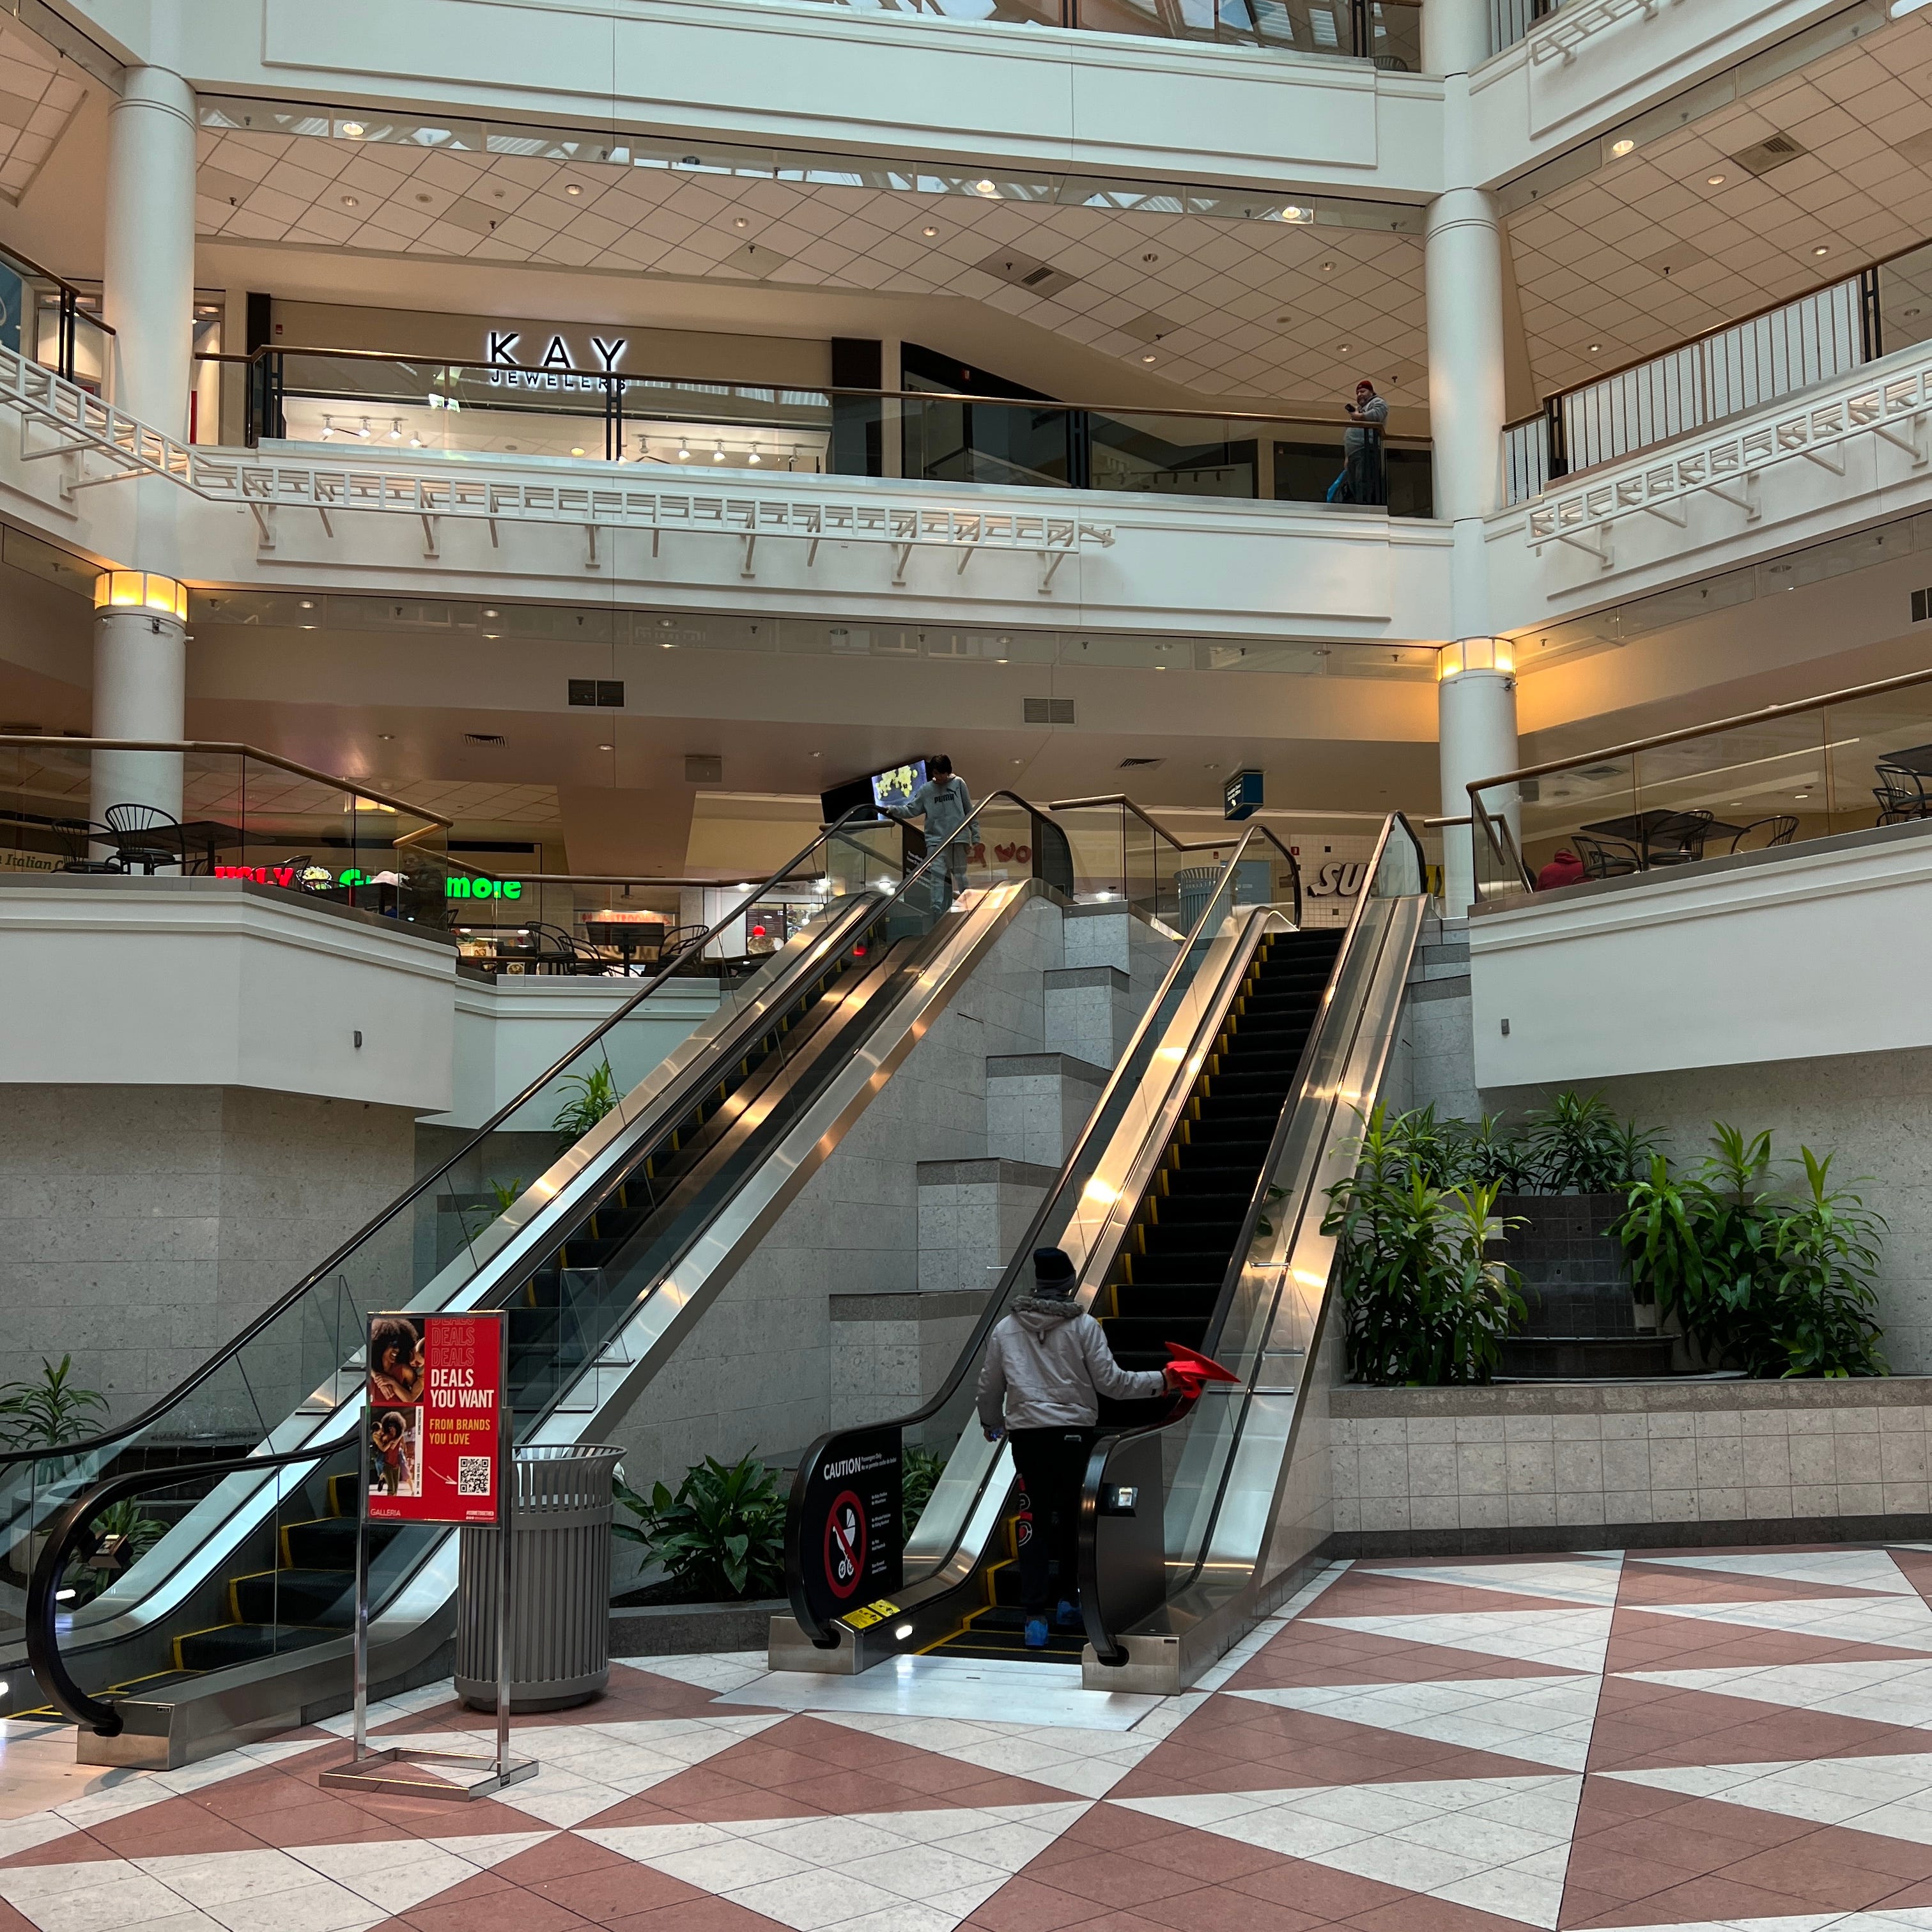 The Galleria mall in White Plains is closing after 43 years